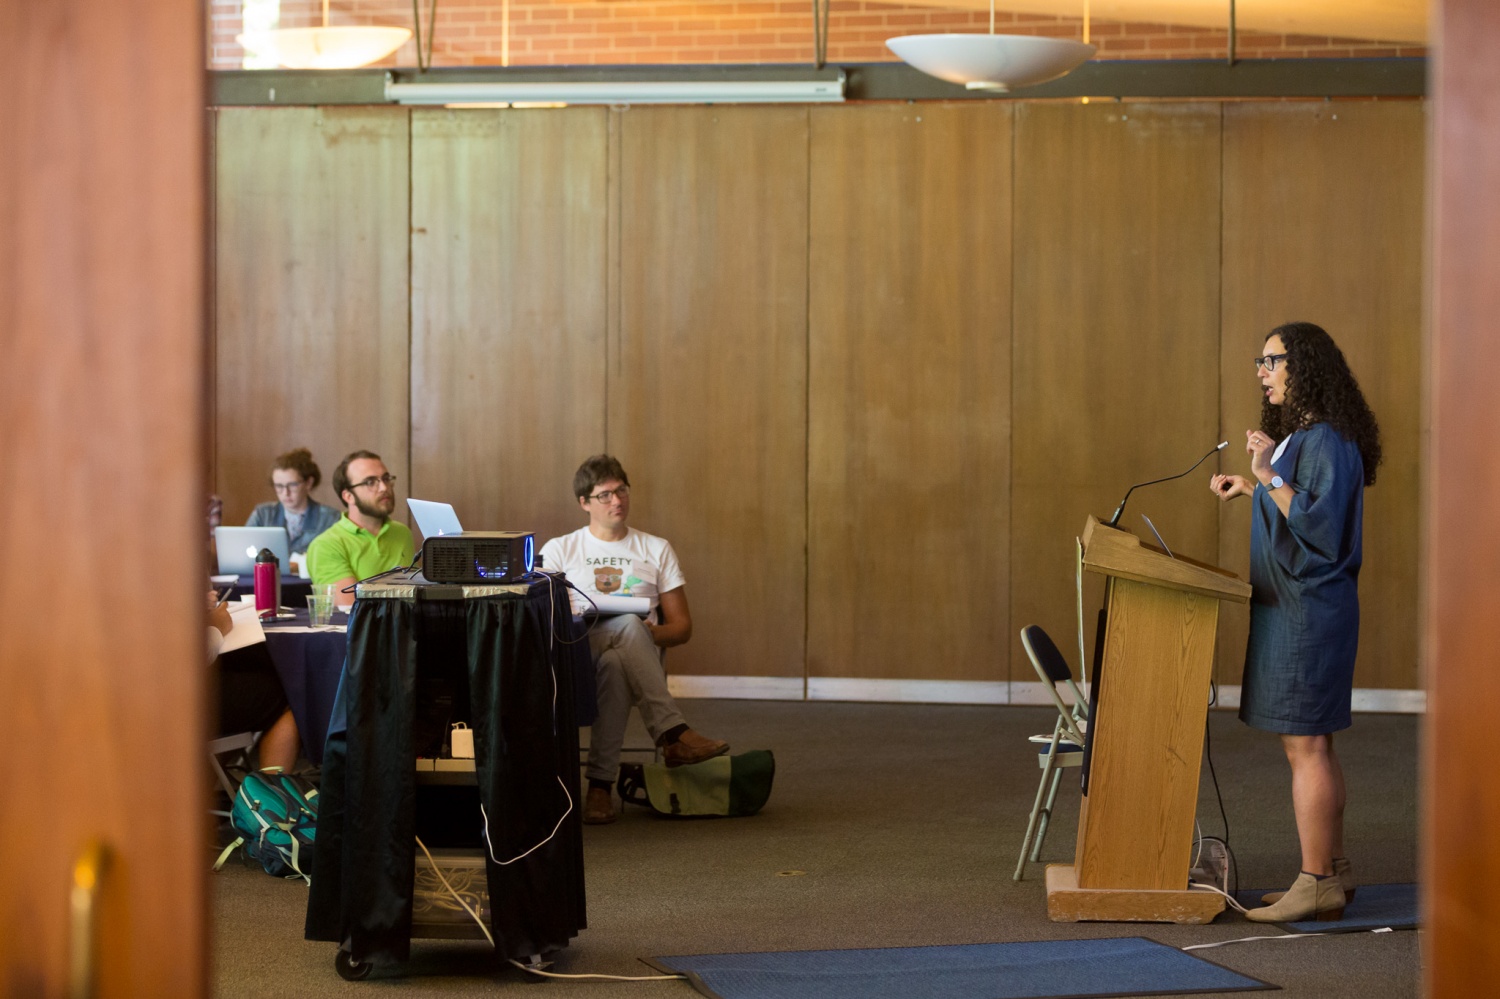 Haven Bourque at the Research-to-Policy Faculty Workshop. Photo by Jonathan Fong.